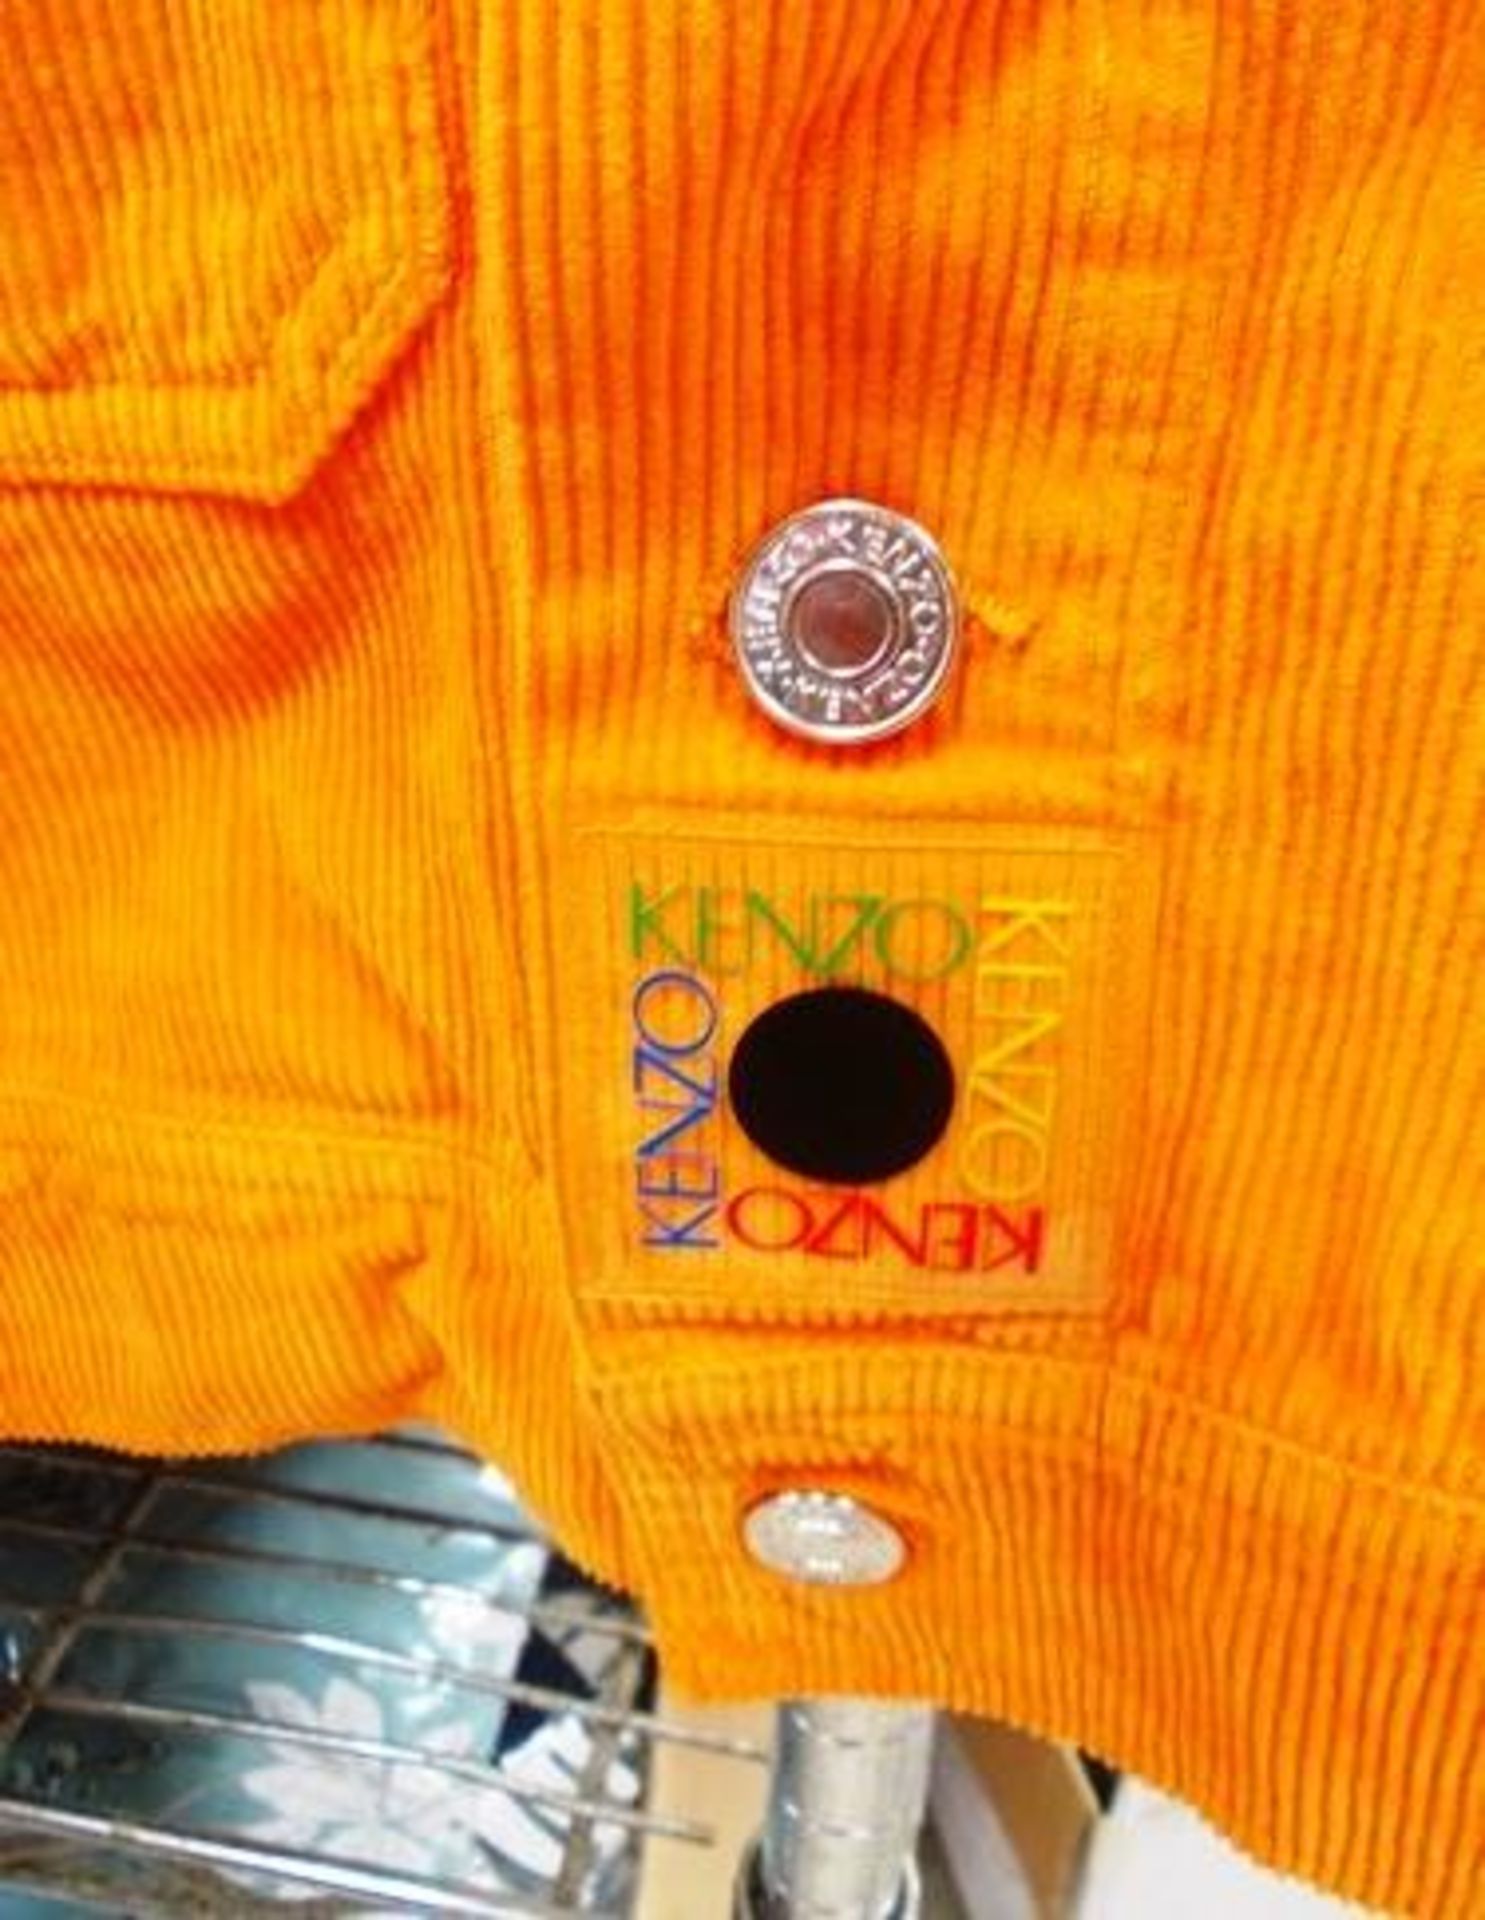 2 x jackets comprising 1 x labelled Lanvin Gallery Dept, EU size 50 and 1 x labelled Kenzo, orange - Image 2 of 7